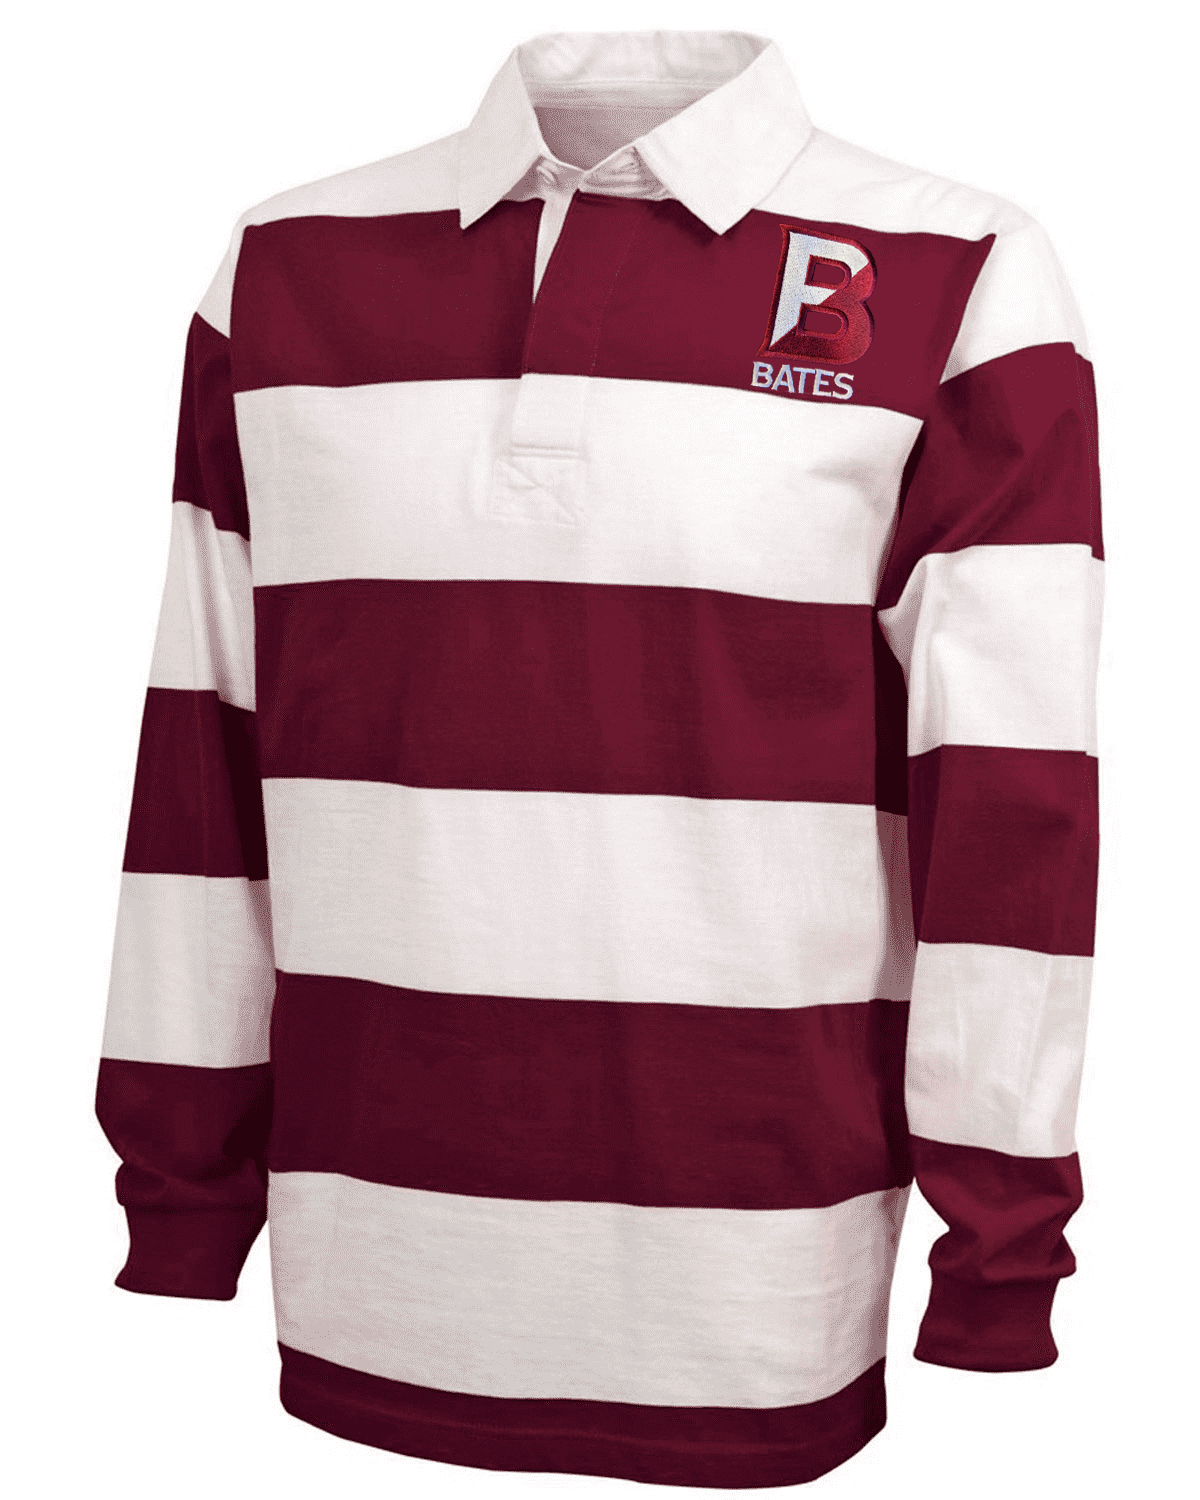 Charles River, Bates Rugby Shirt Bates College Store